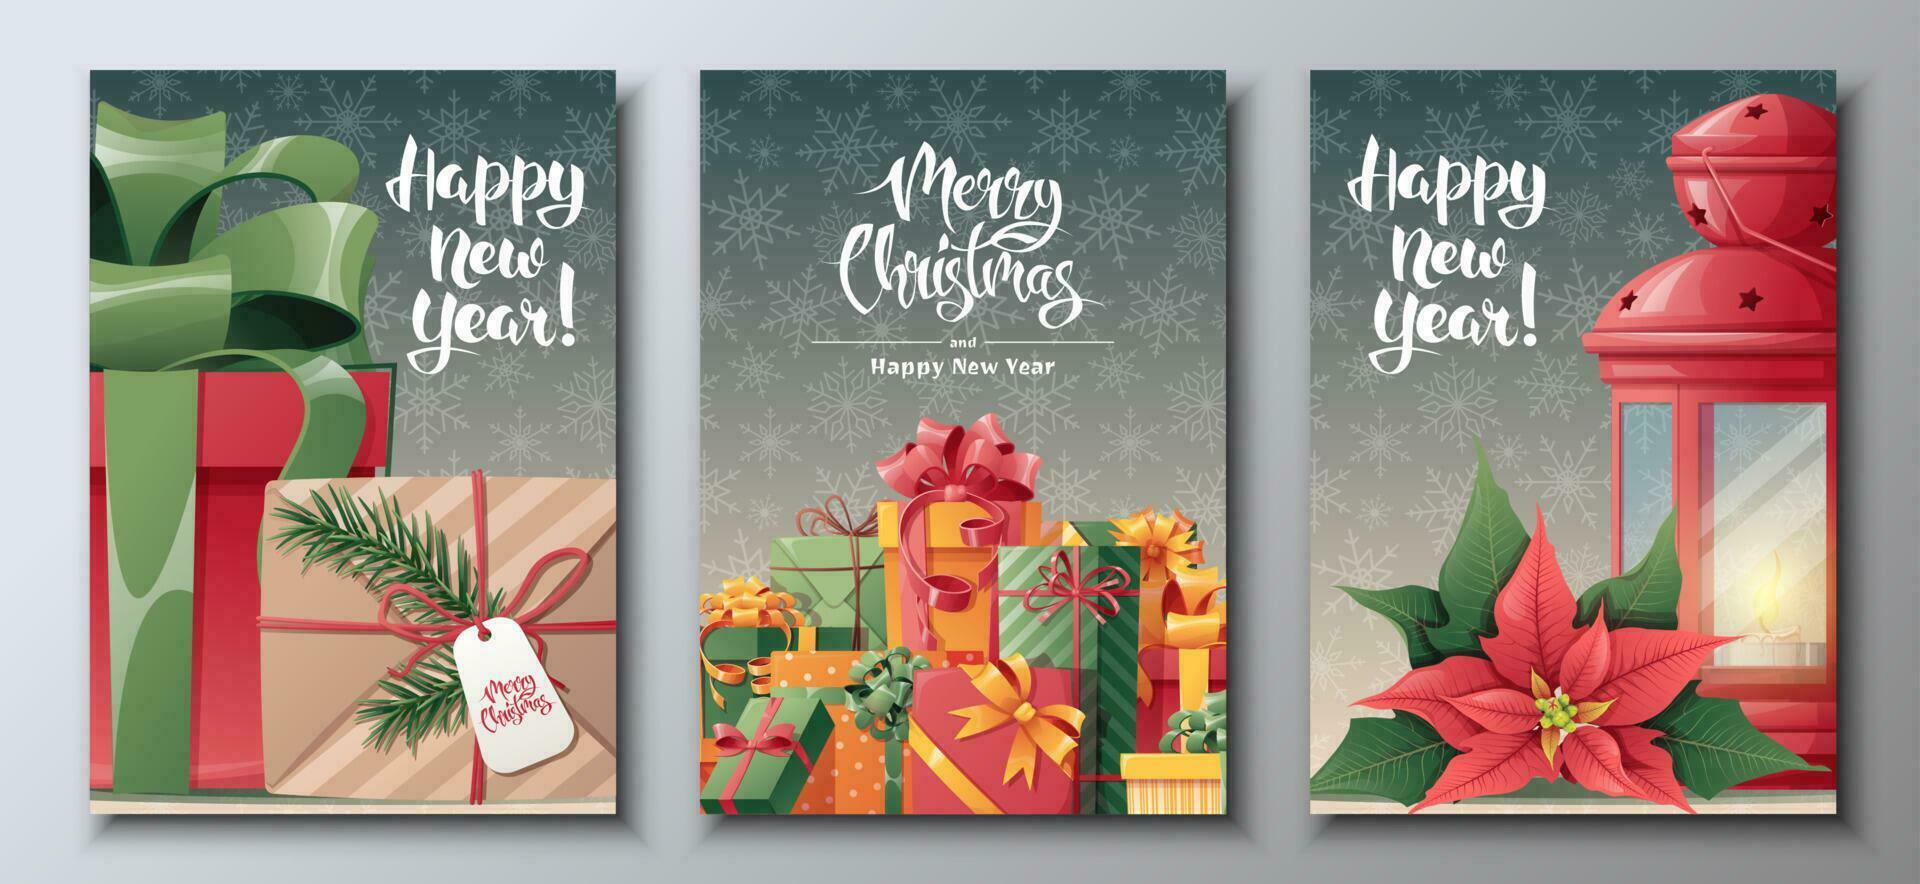 Set of christmas cards with bunch of gift boxes, red lantern, rocking horse. Festive Christmas poster with winter decor. Vector illustration for banner, flyer, postcard